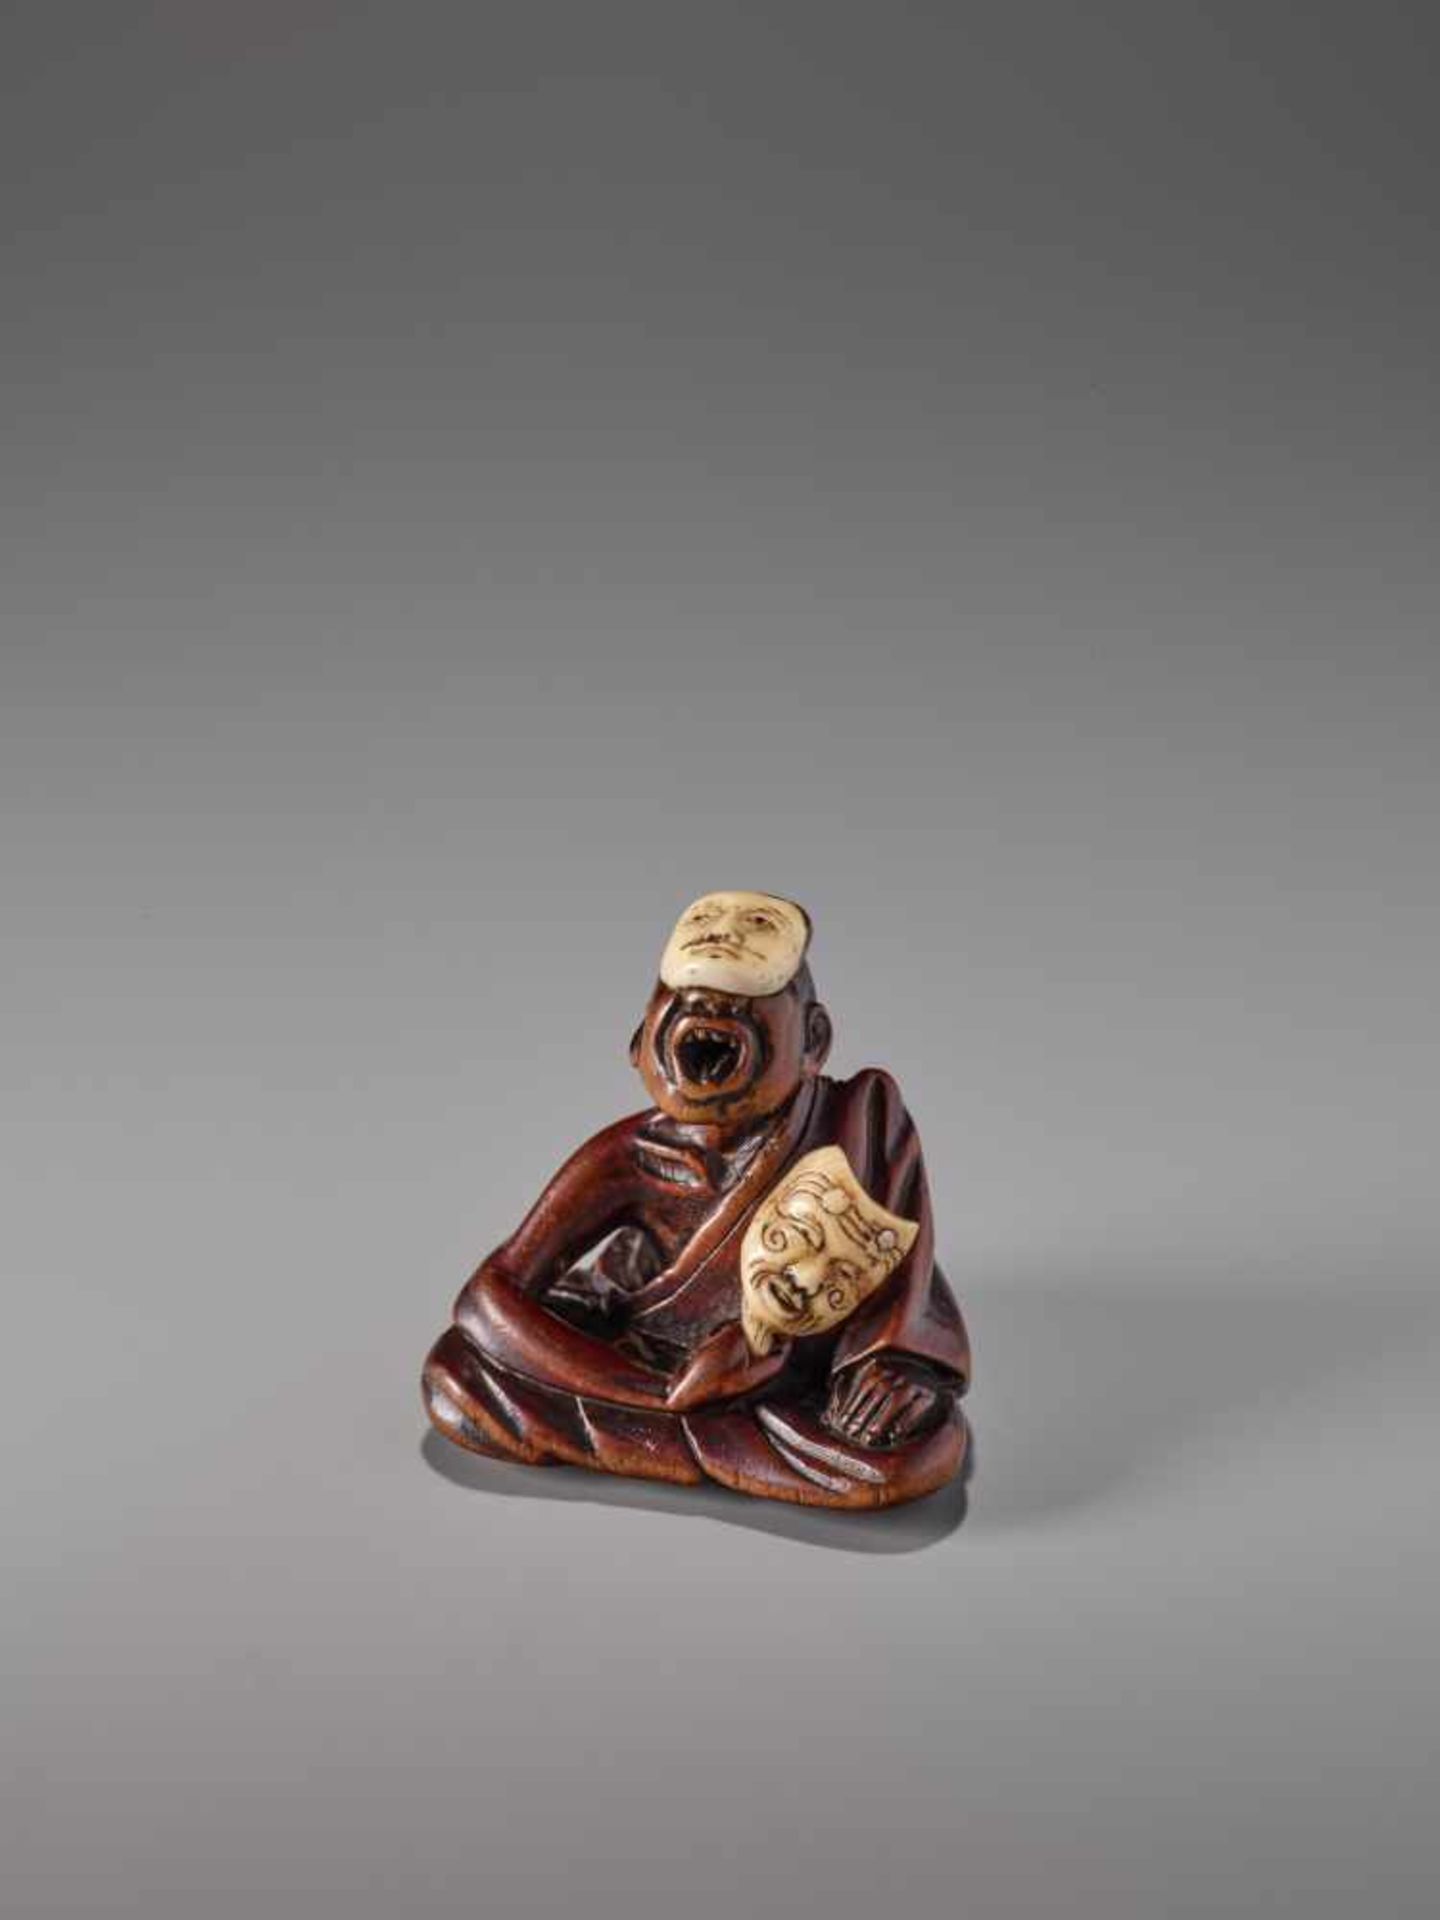 AN UNUSUAL WOOD AND IVORY NETSUKE OF A SNEEZER AS A NOH ACTOR BY HOKEIWood netsuke with - Image 2 of 7